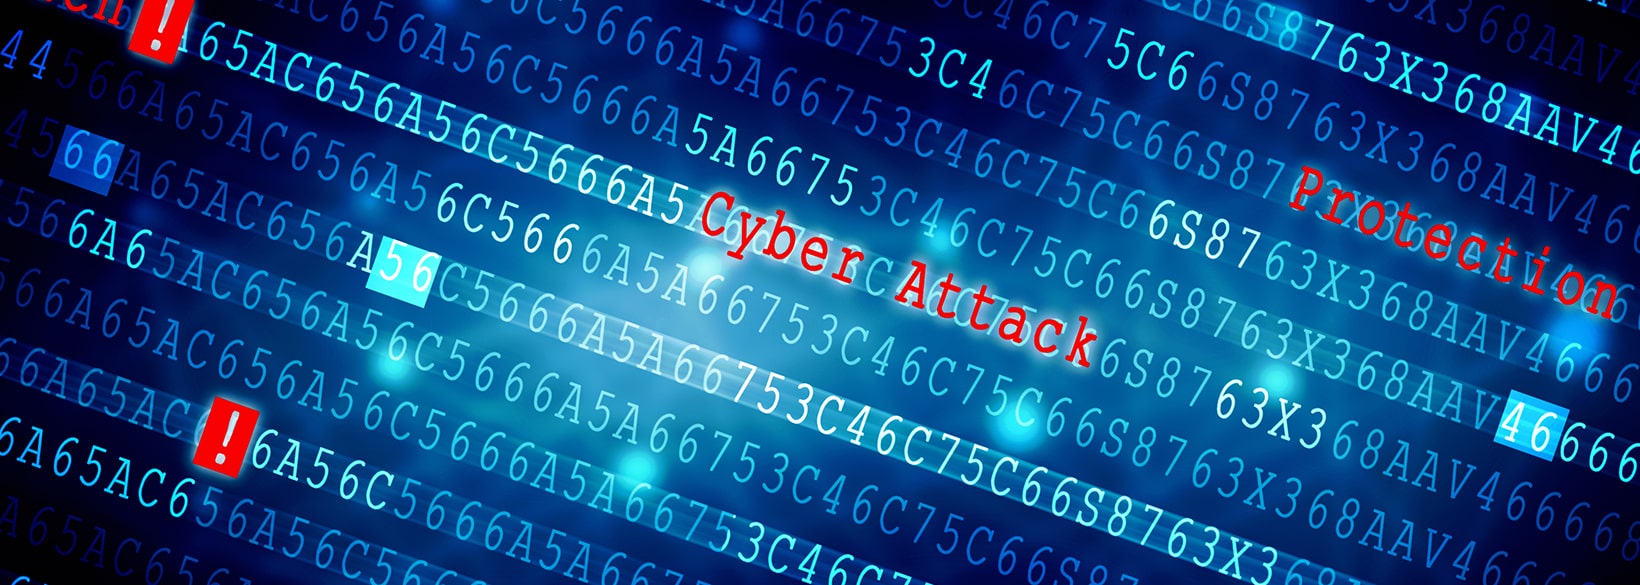 Prominent Types of Cyberattacks - Ironclad TEK